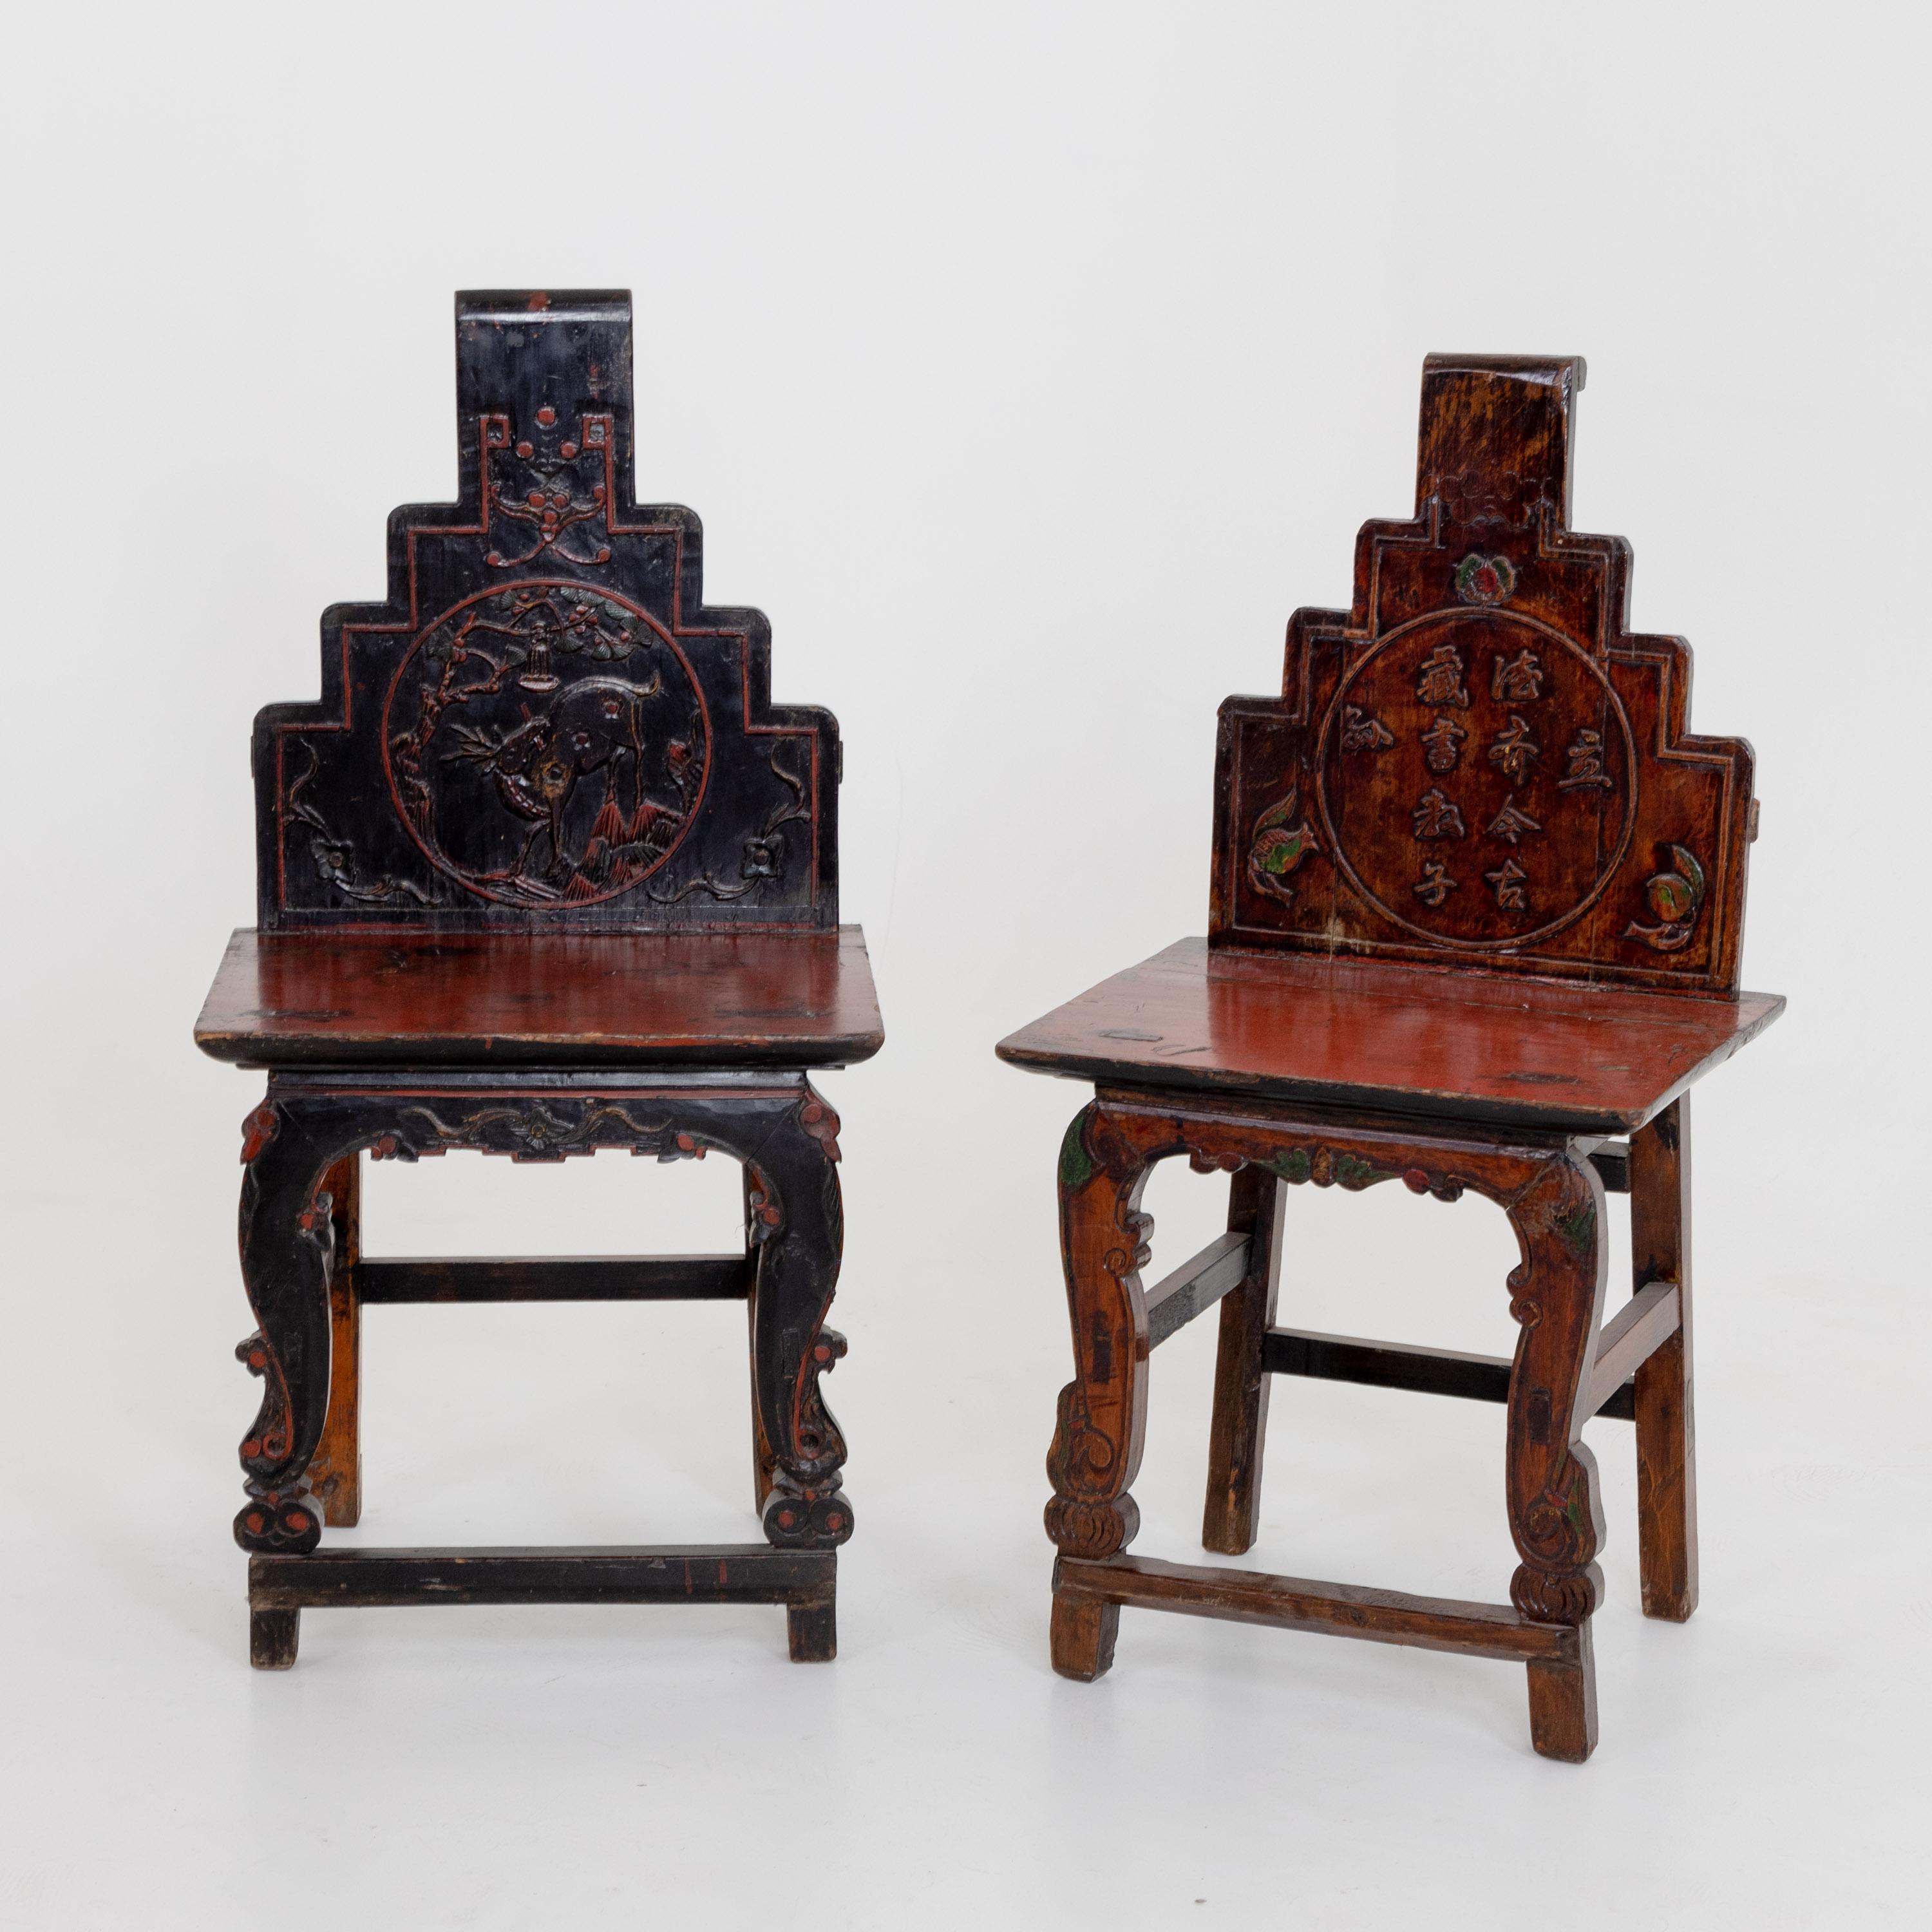 Pair of Chinese wooden chairs with stepped backs and carved decoration.